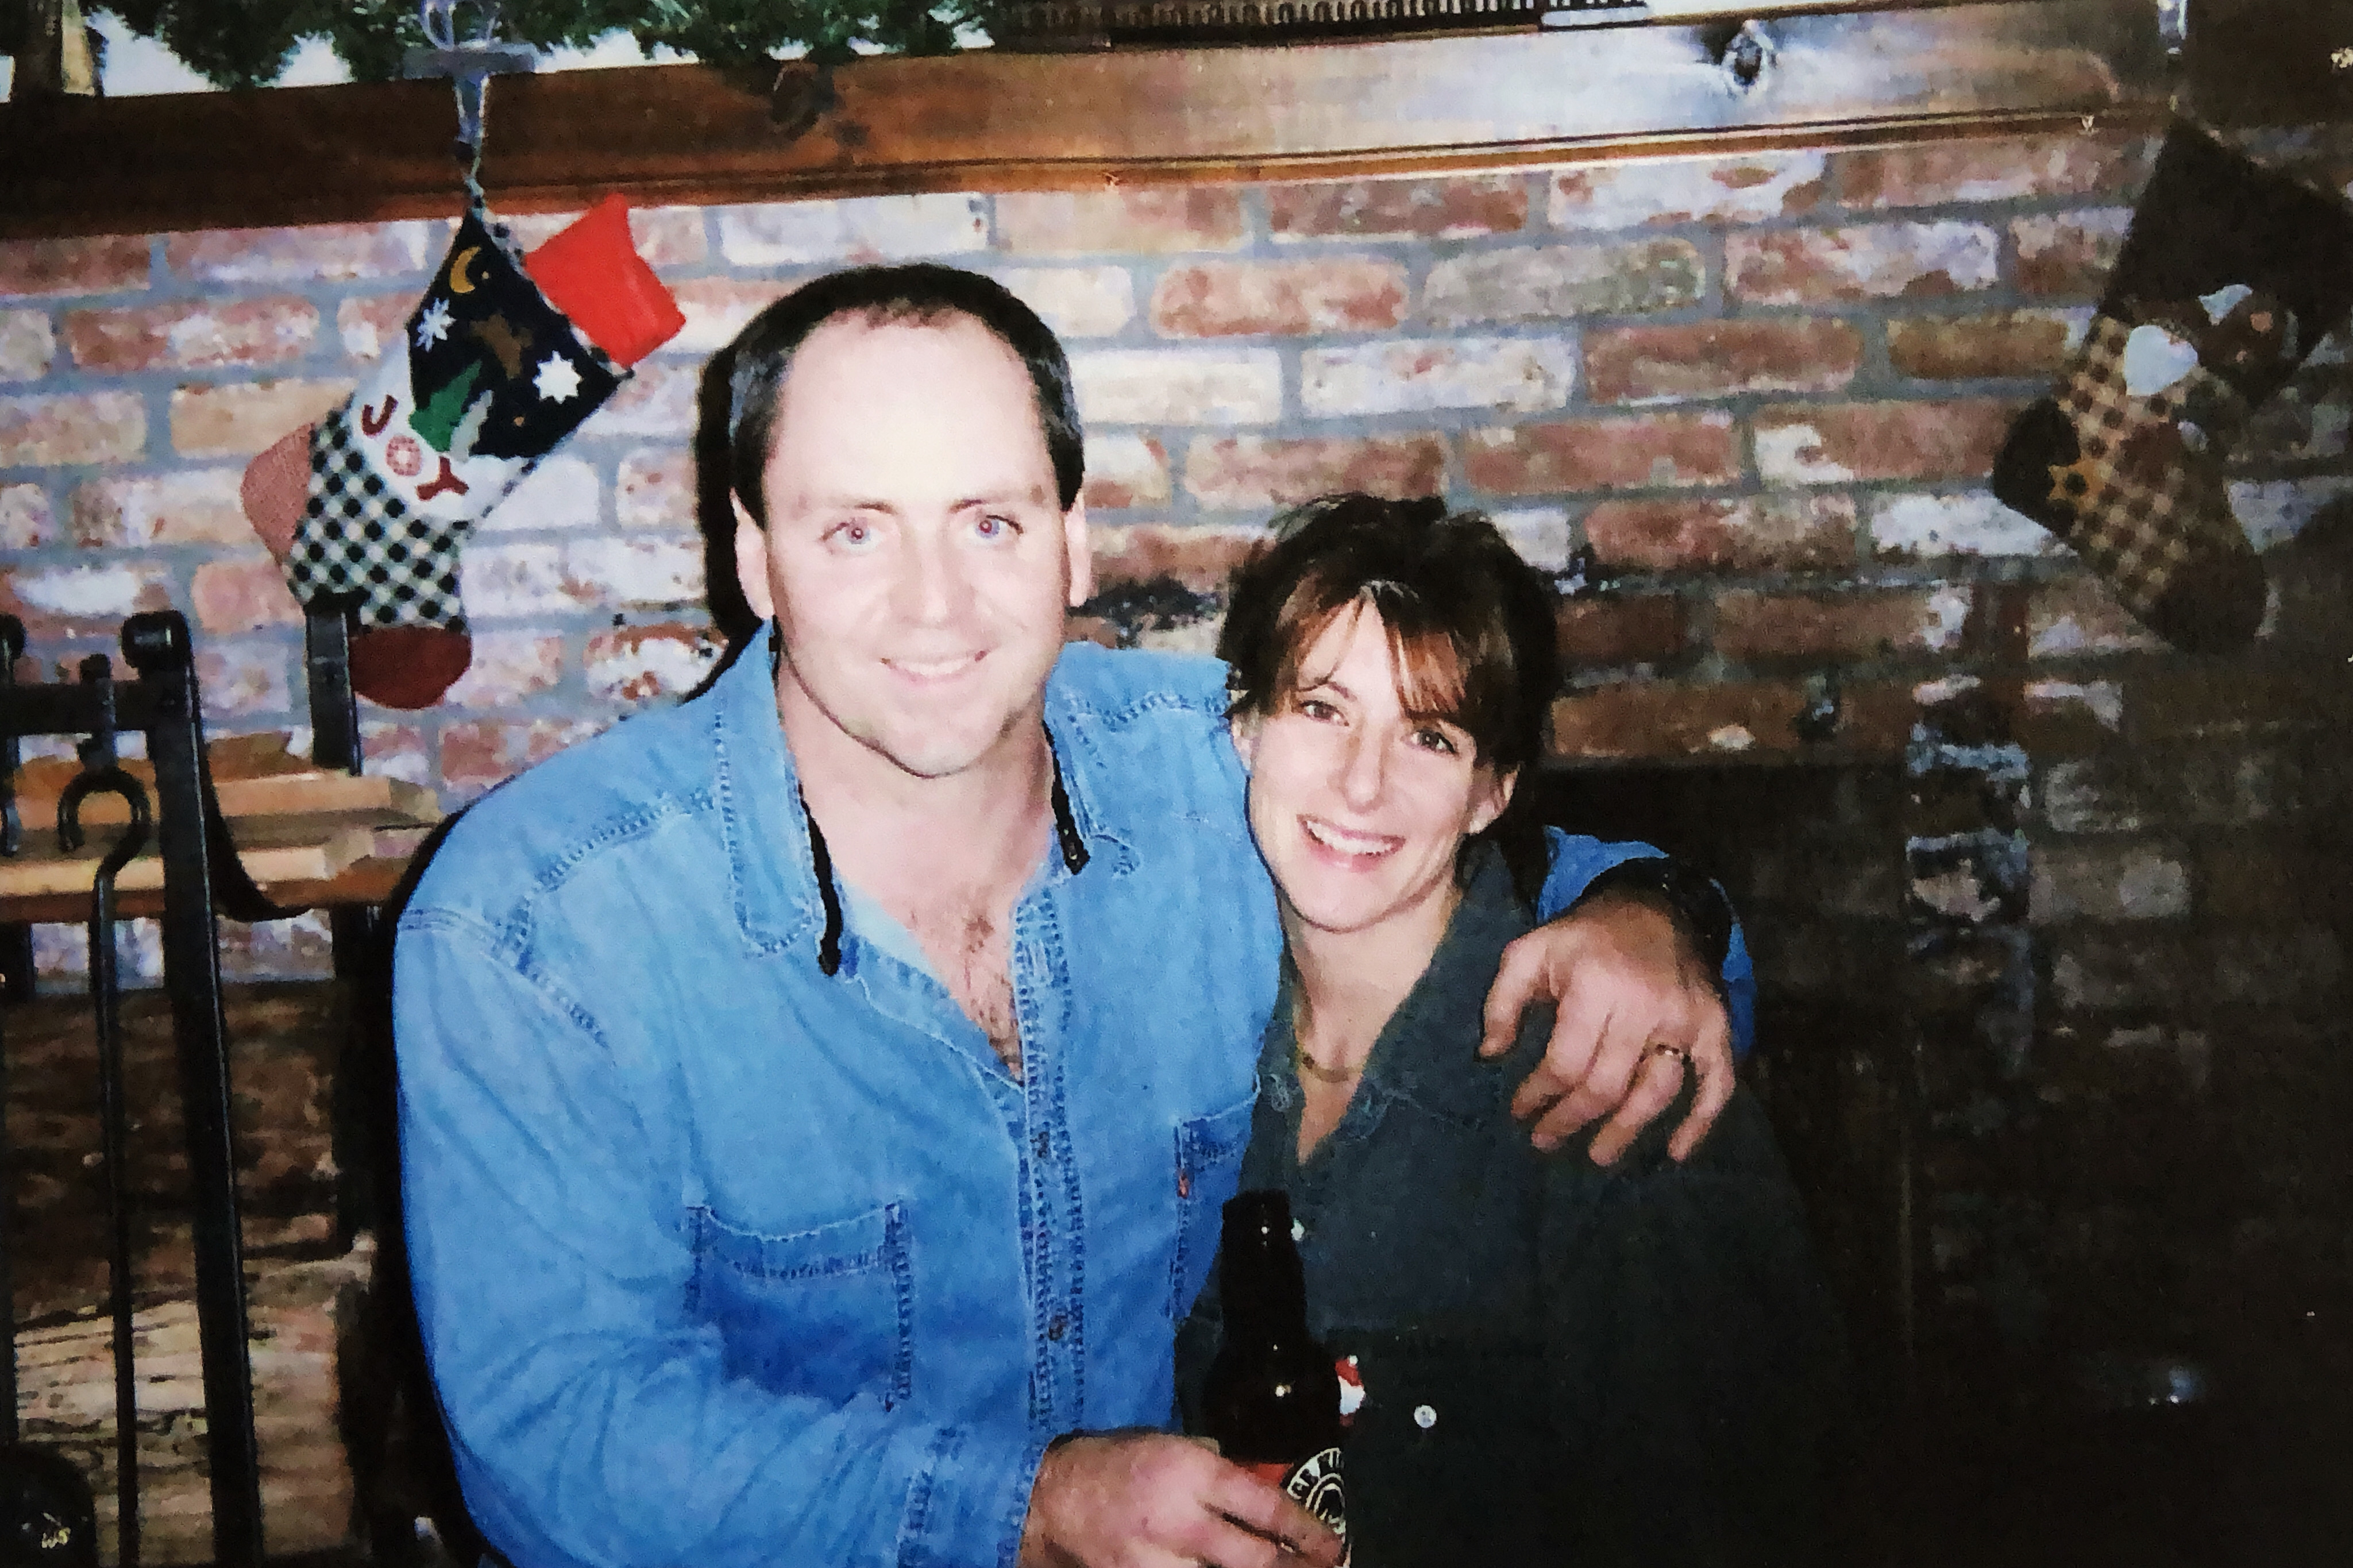 Brian Sweeney and Julie Sweeney Roth smile in an old photo.